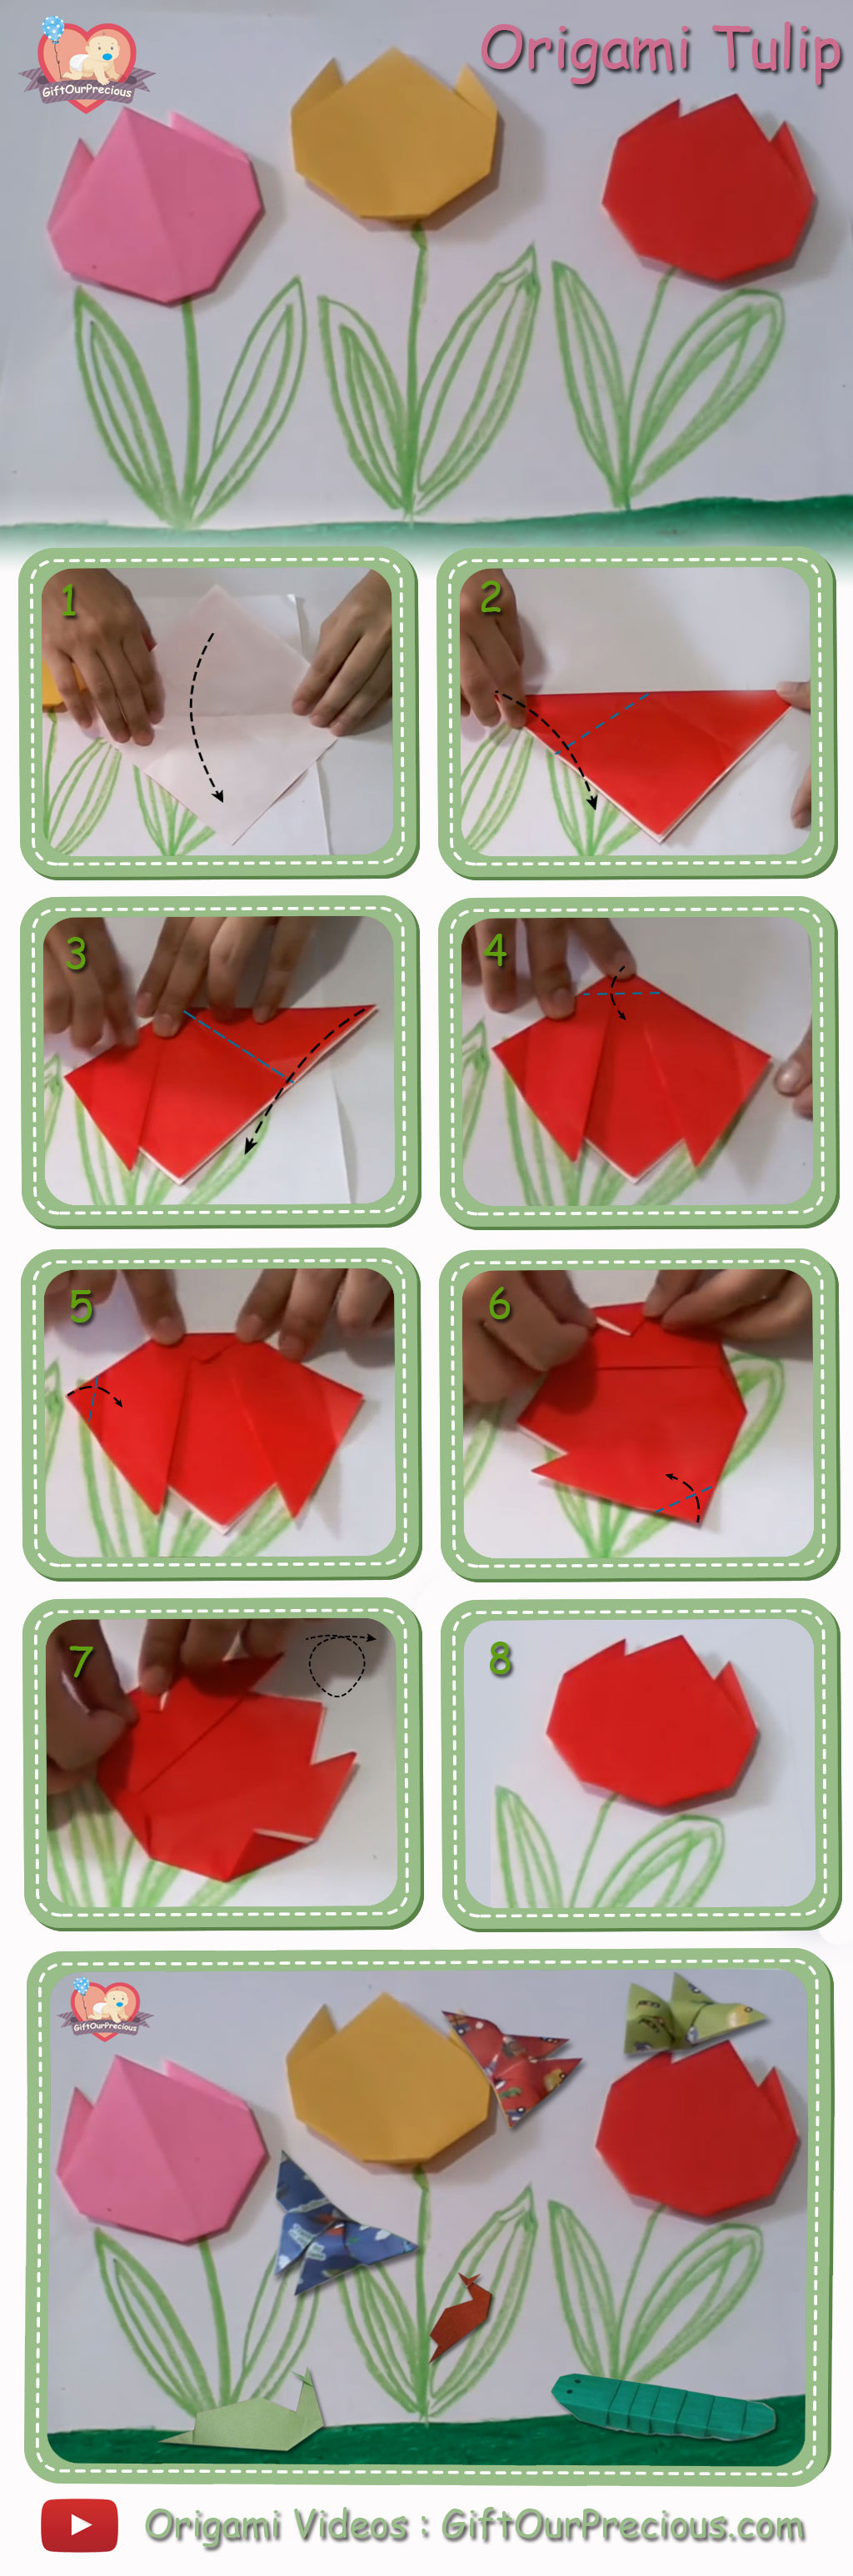 How To Make An Origami Tulip Origami Tulip Flowers Step Step Instruction Gift Our Precious